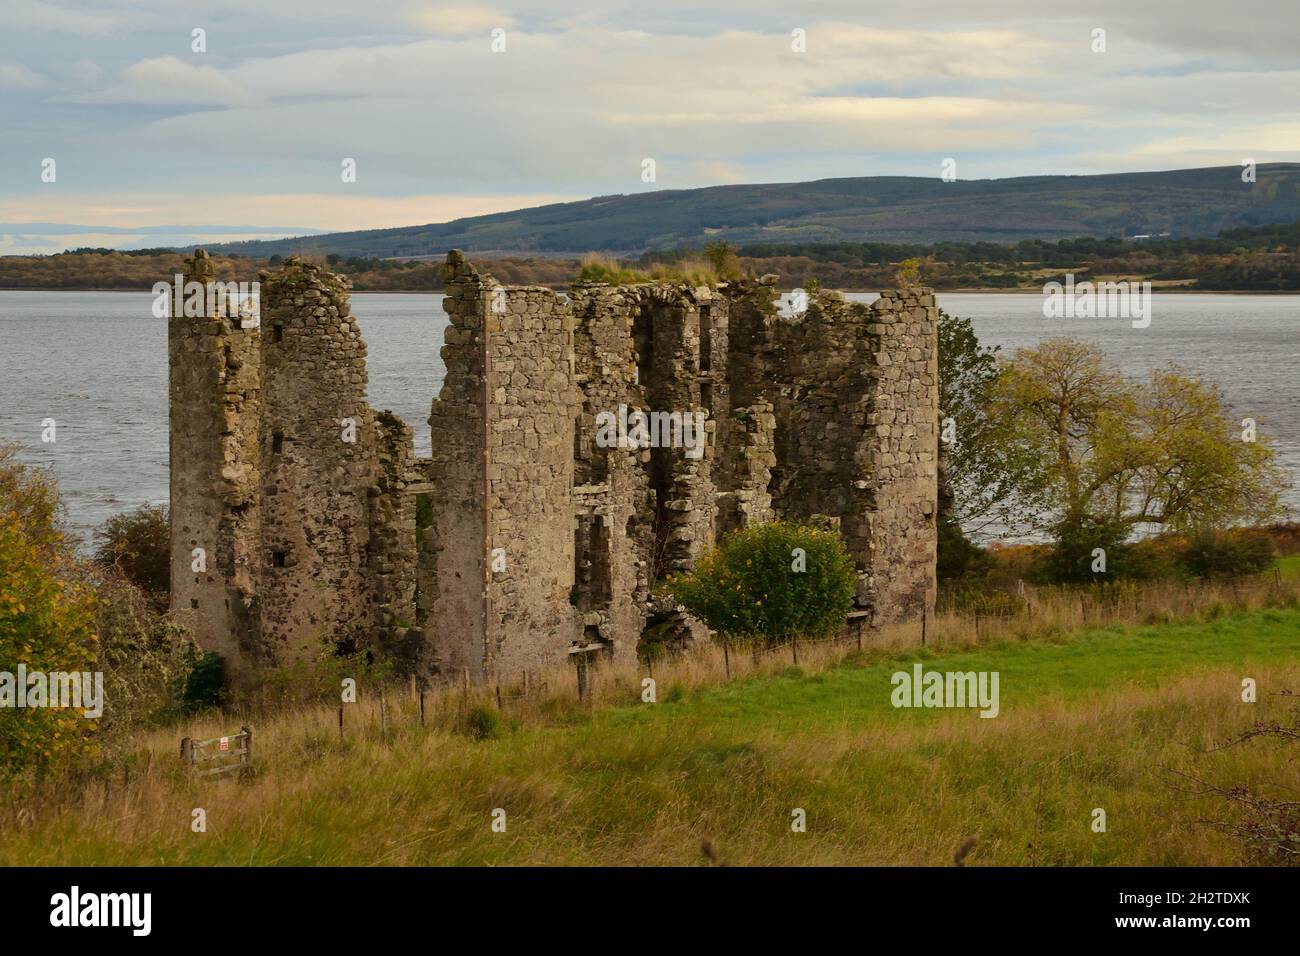 The ruins of Spinningdale Mill in 2021, on the shores of the Dornoch Firth, Sutherland, Scottish Highlands, UK. Stock Photo